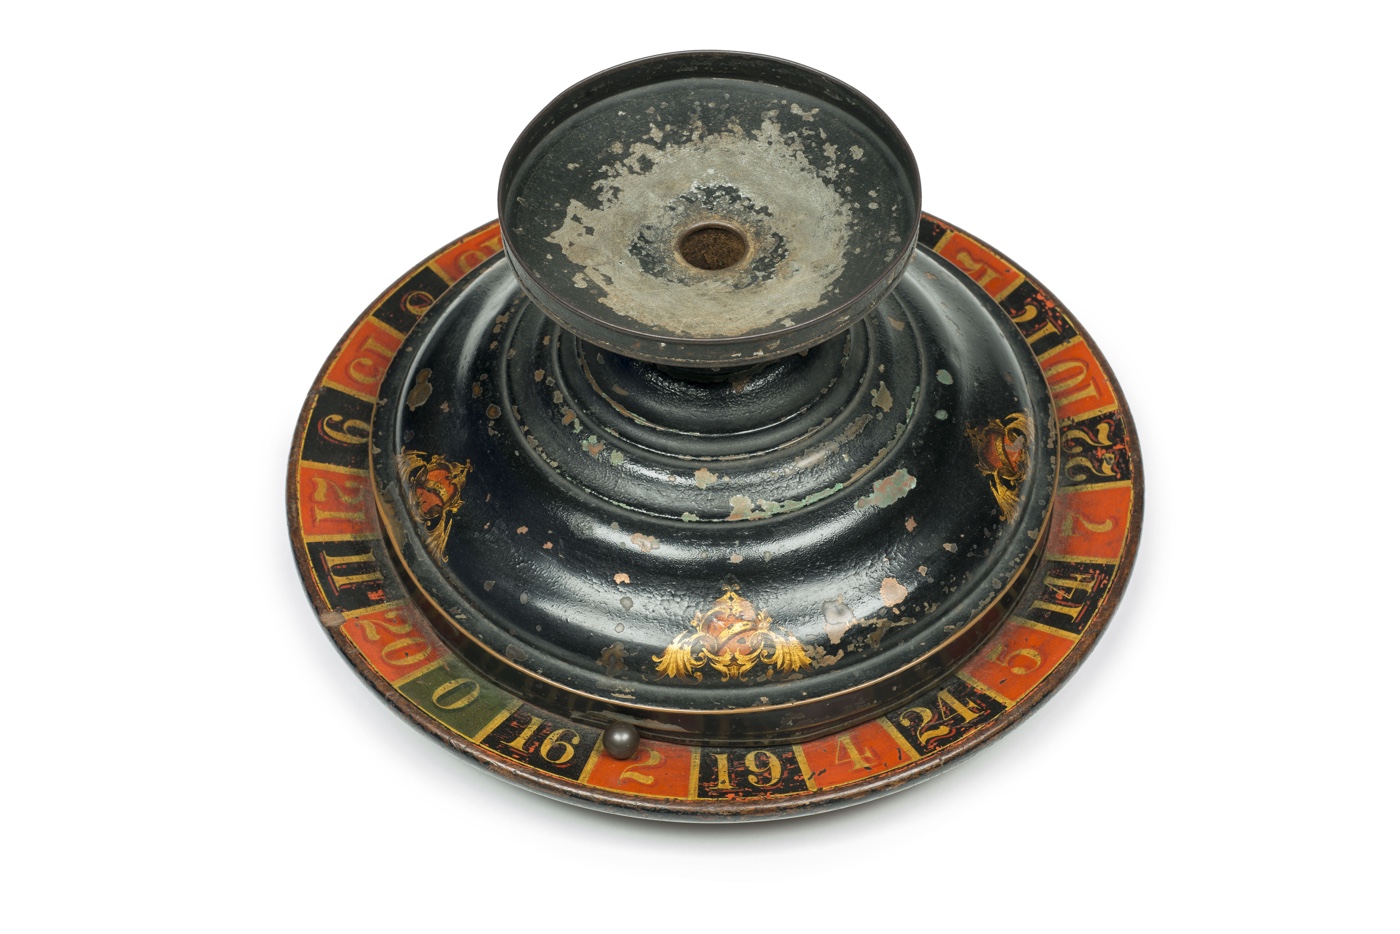 1a4. Gambling Doctored roulette wheel seized from Barnet Fair, c.1885 ∏ Museum of London